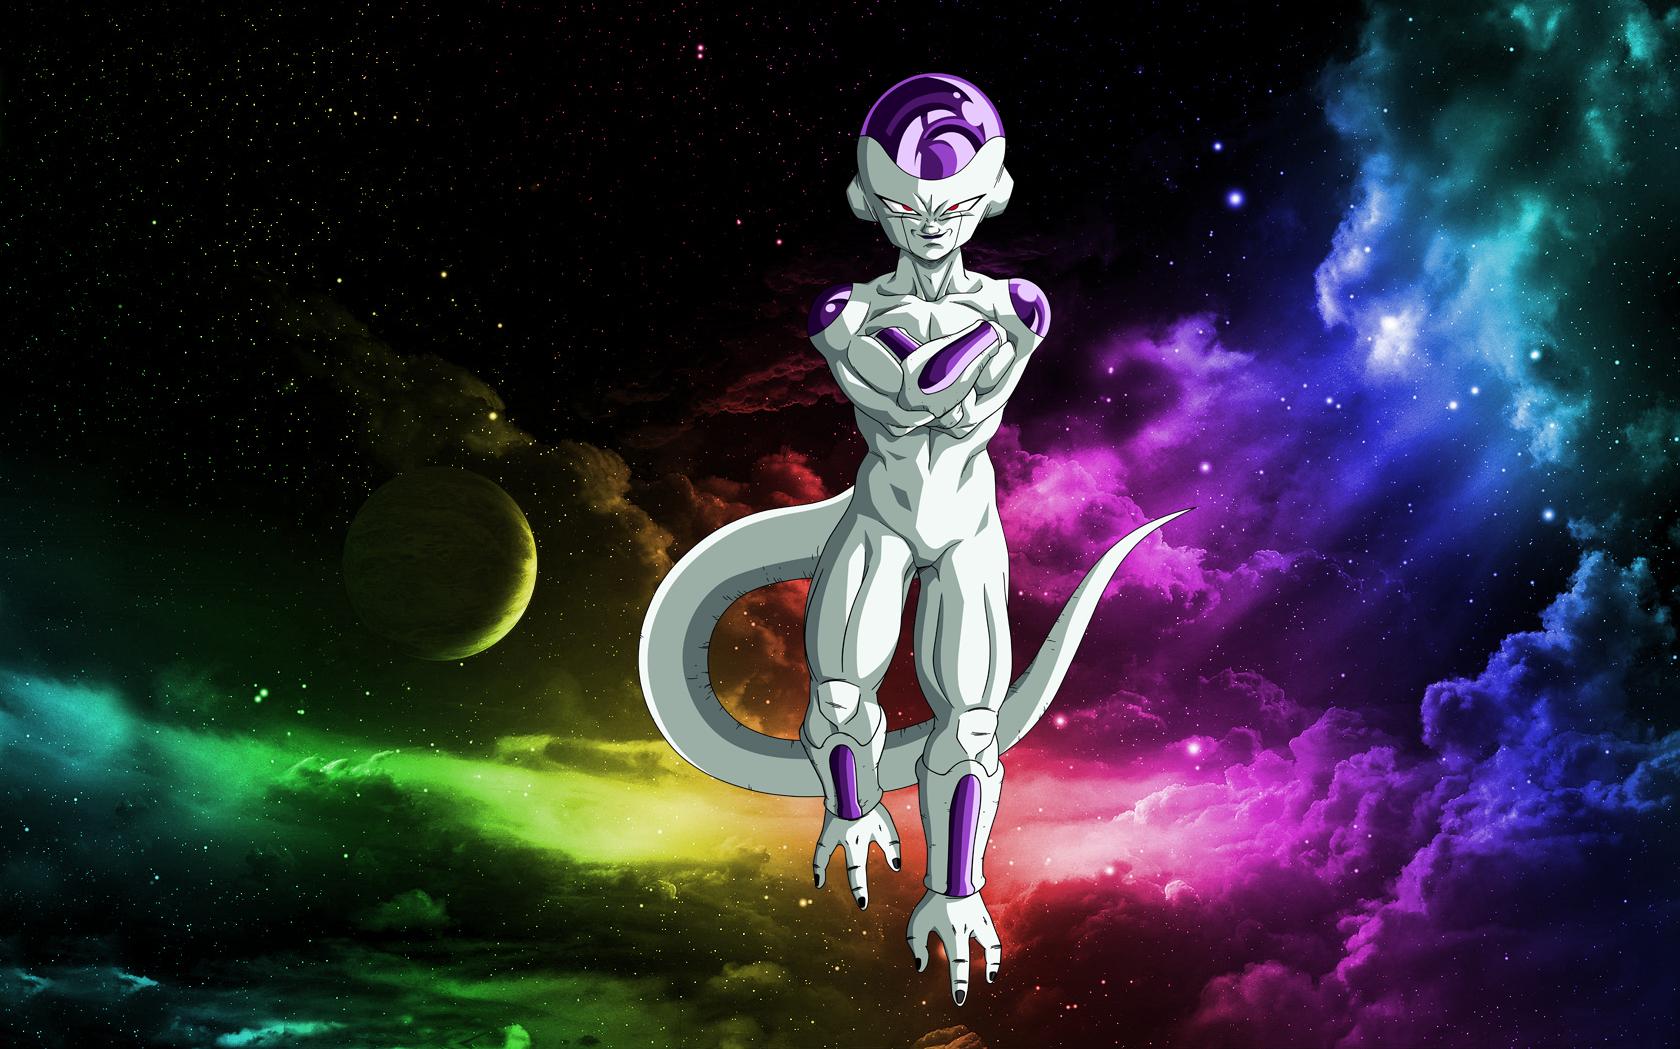 Dragon Ball Z Frieza final form wallpaper by marindusevic on